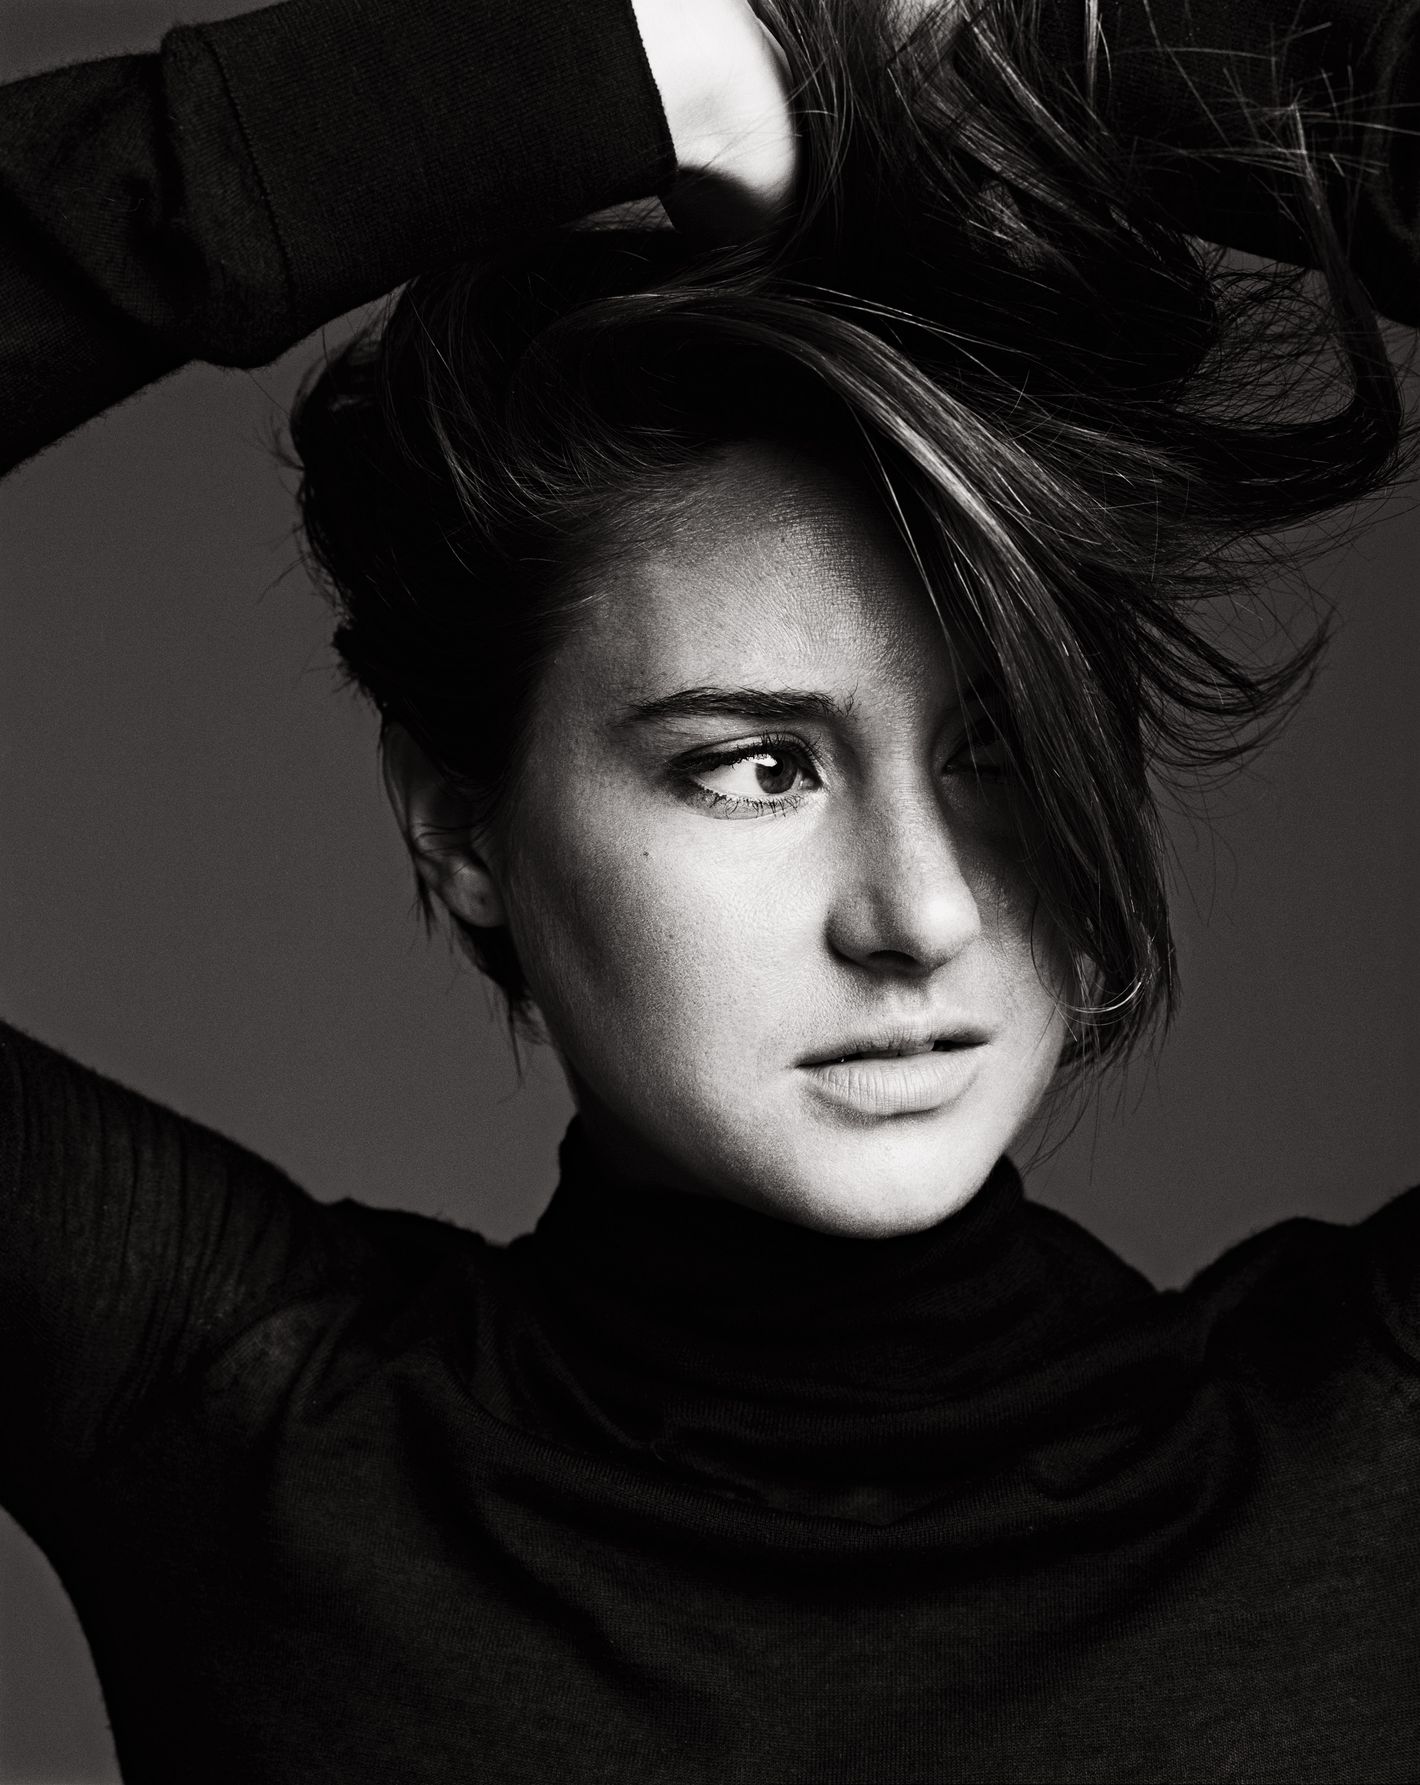 Hard Facking Sexy 16yaer - Shailene Woodley and Brie Larson Are Out to Conquer Hollywoodâ€”and ...